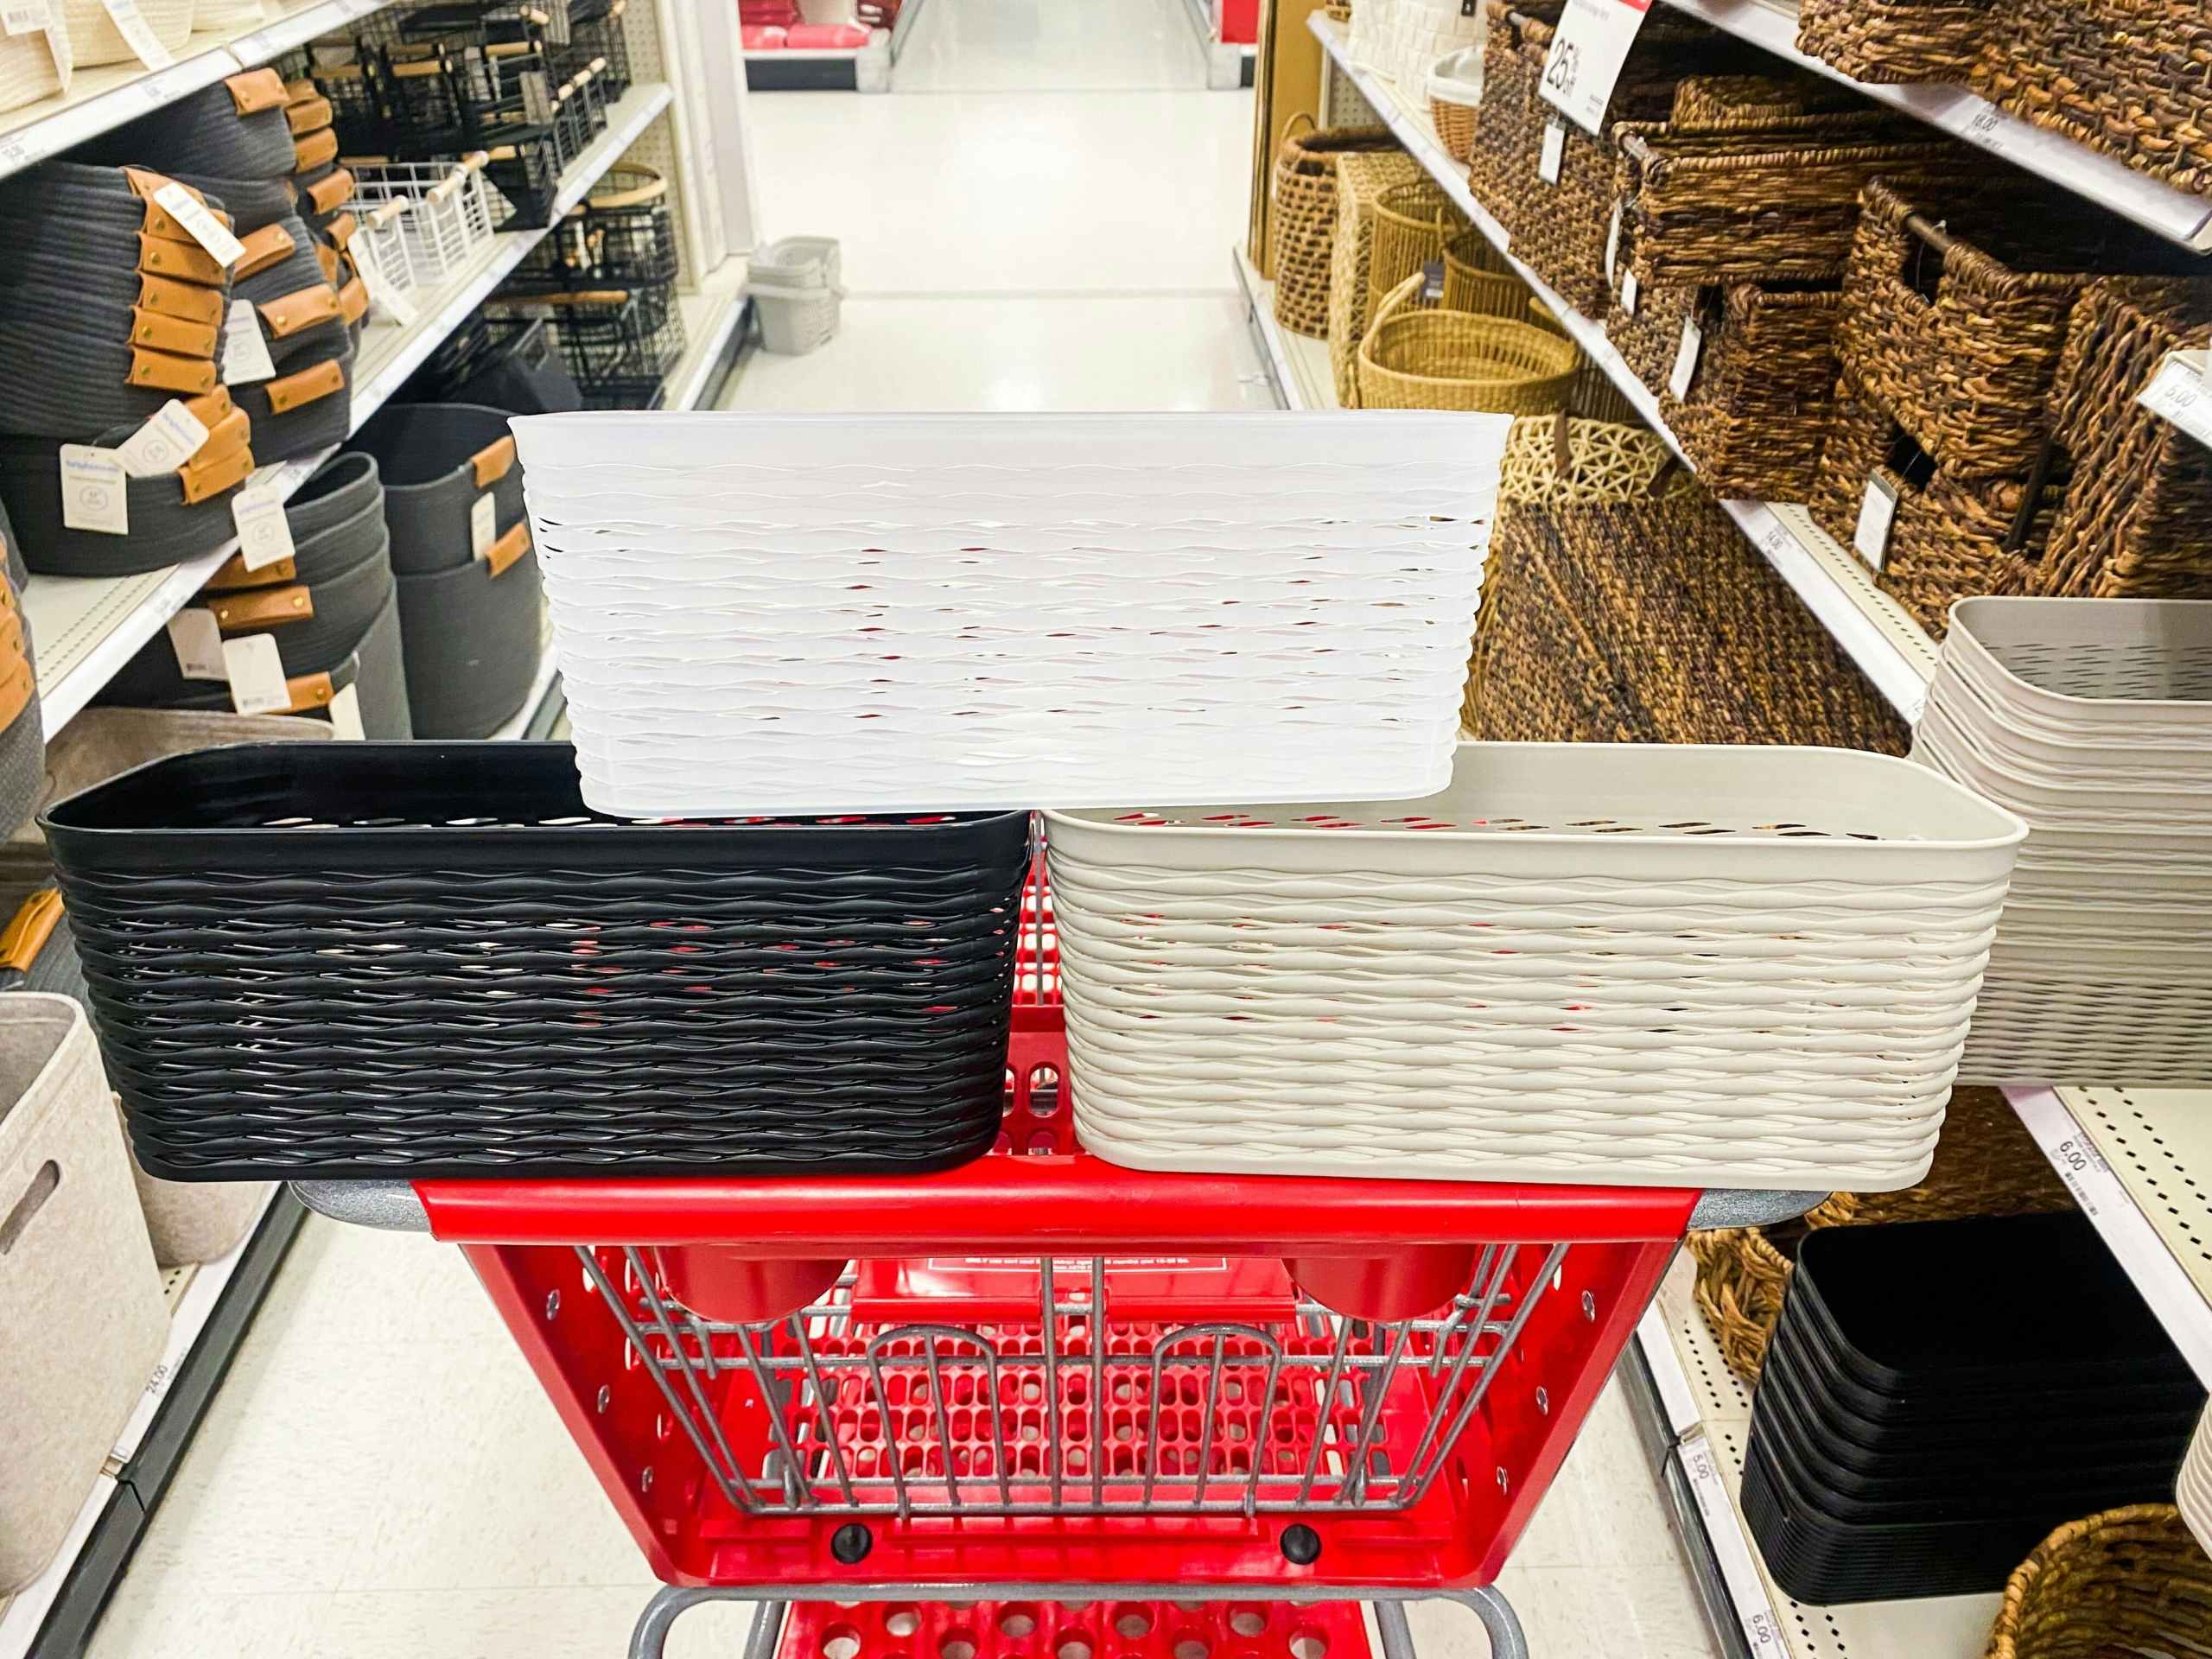 Three decorative storage baskets in a Target shopping cart next to other storage baskets on shelves